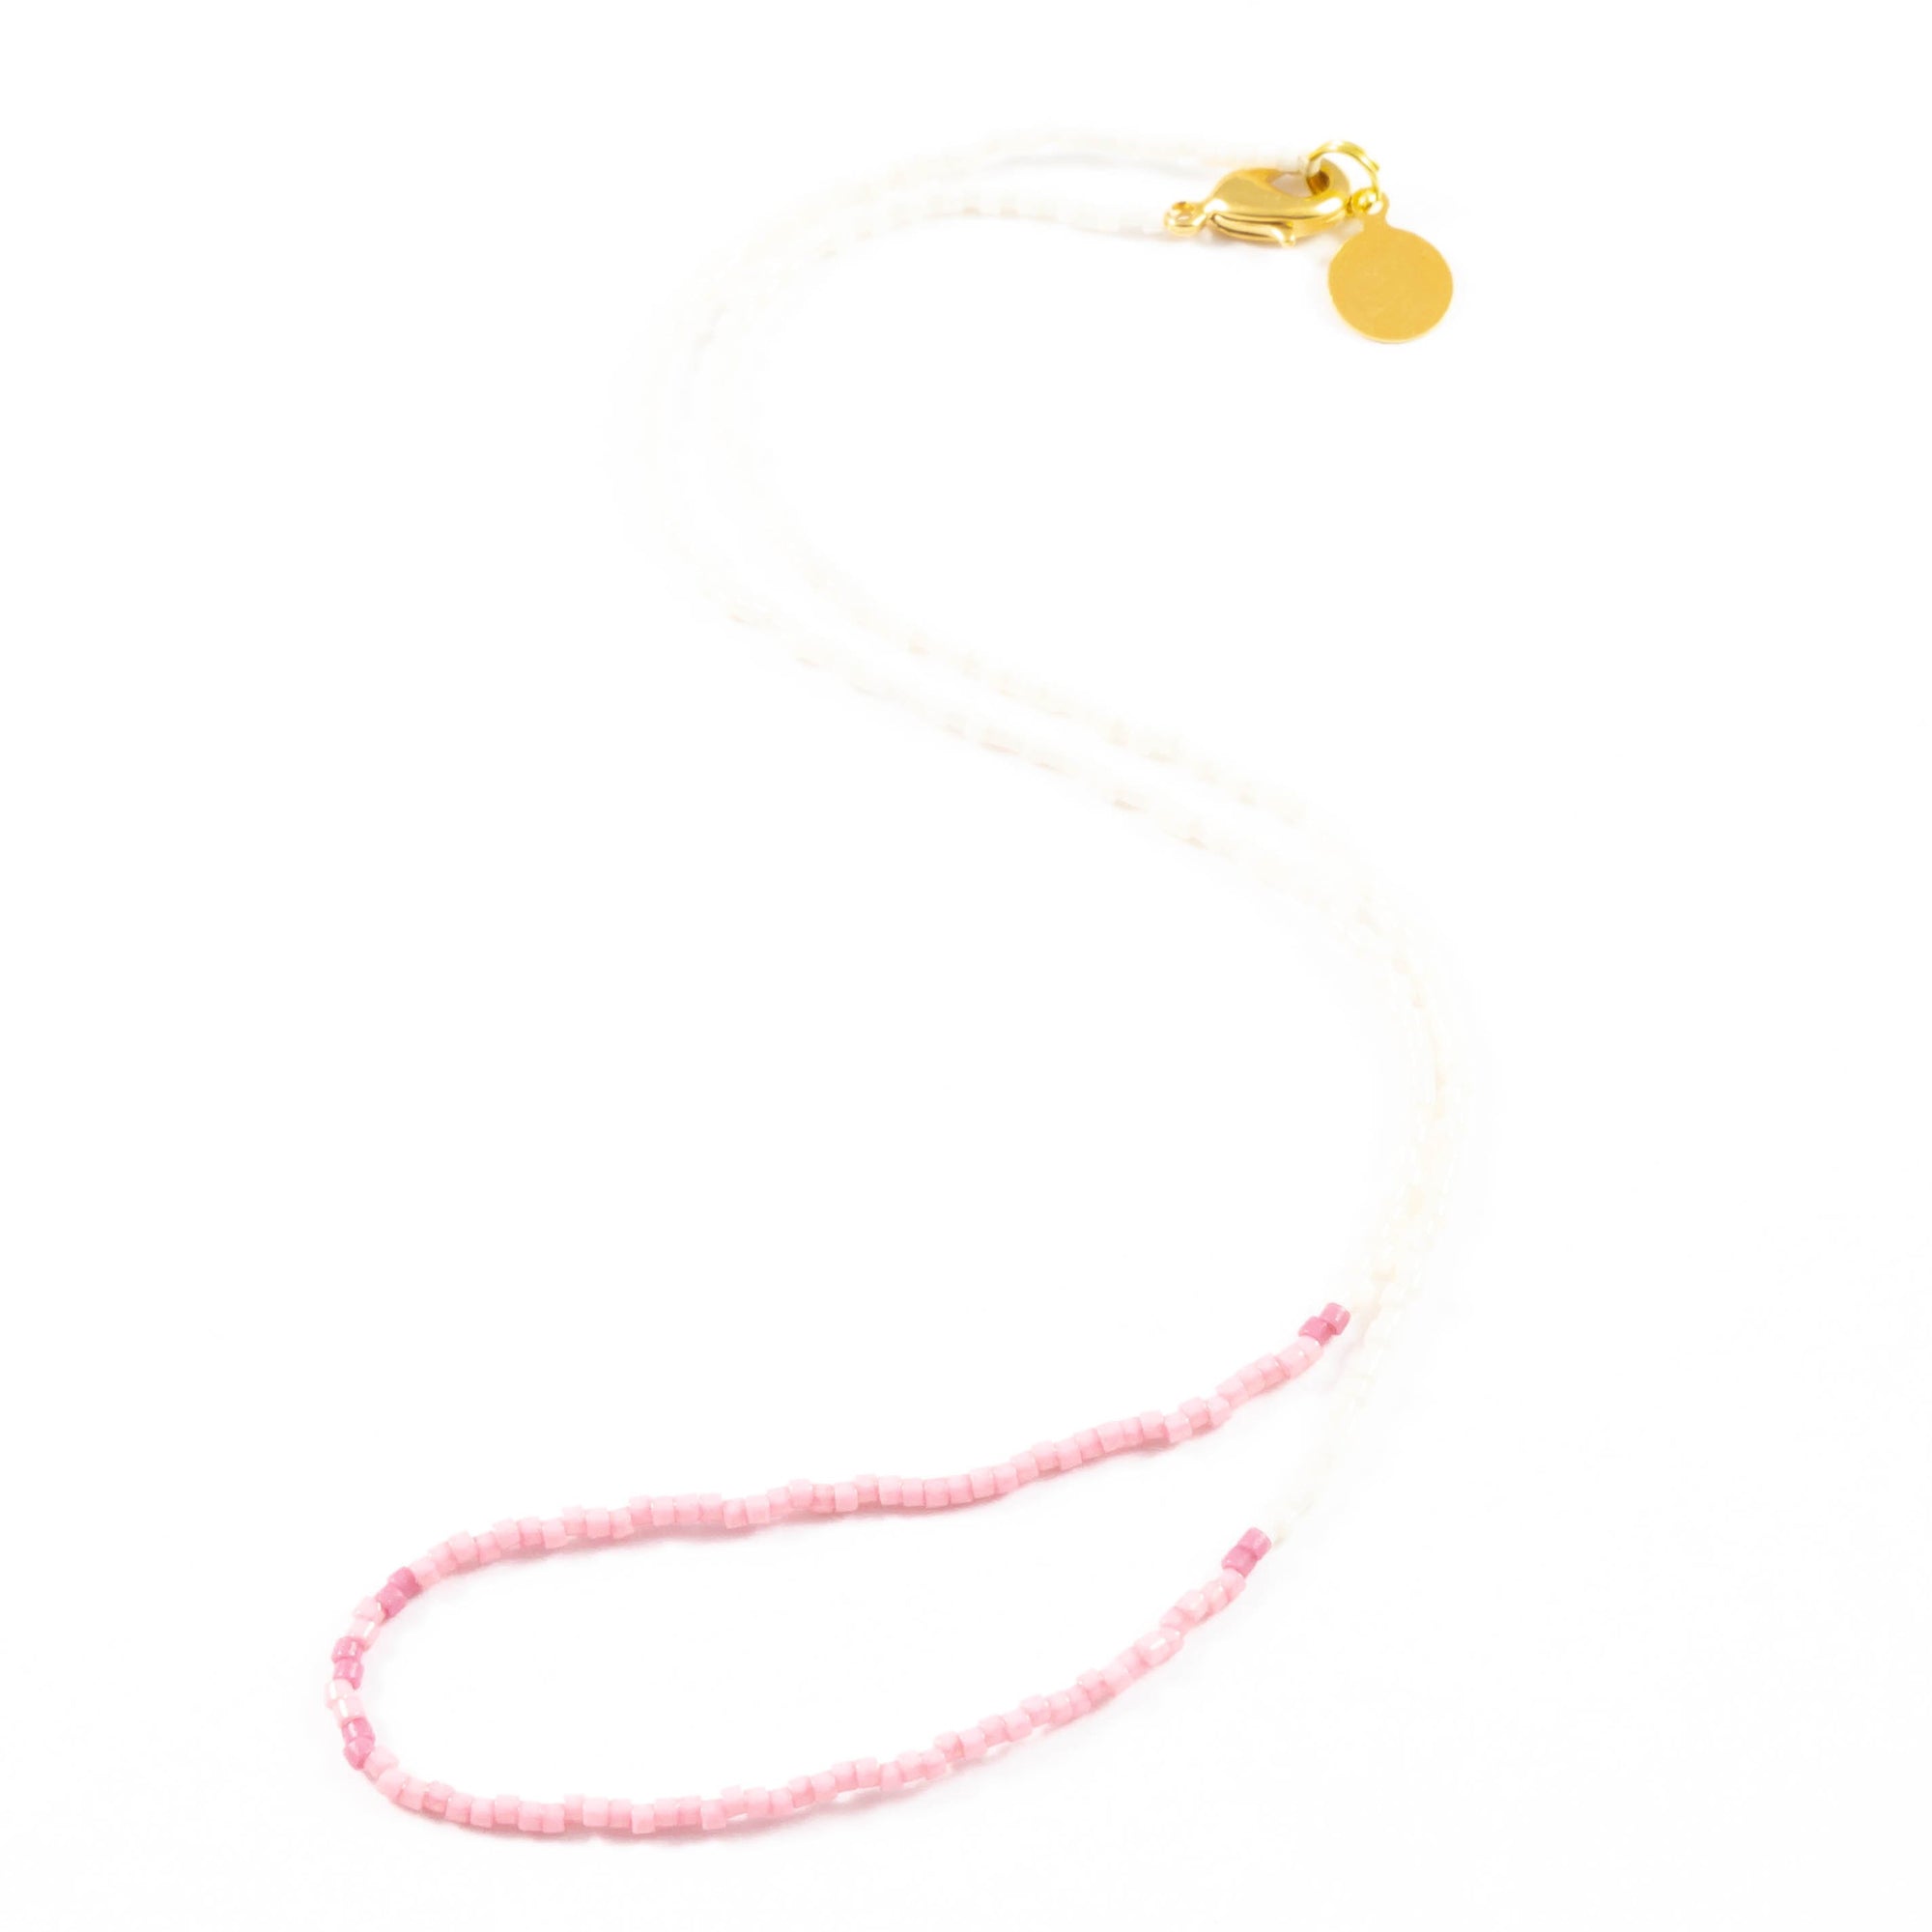 Pinks Day at the Beach Wanderlust Necklace